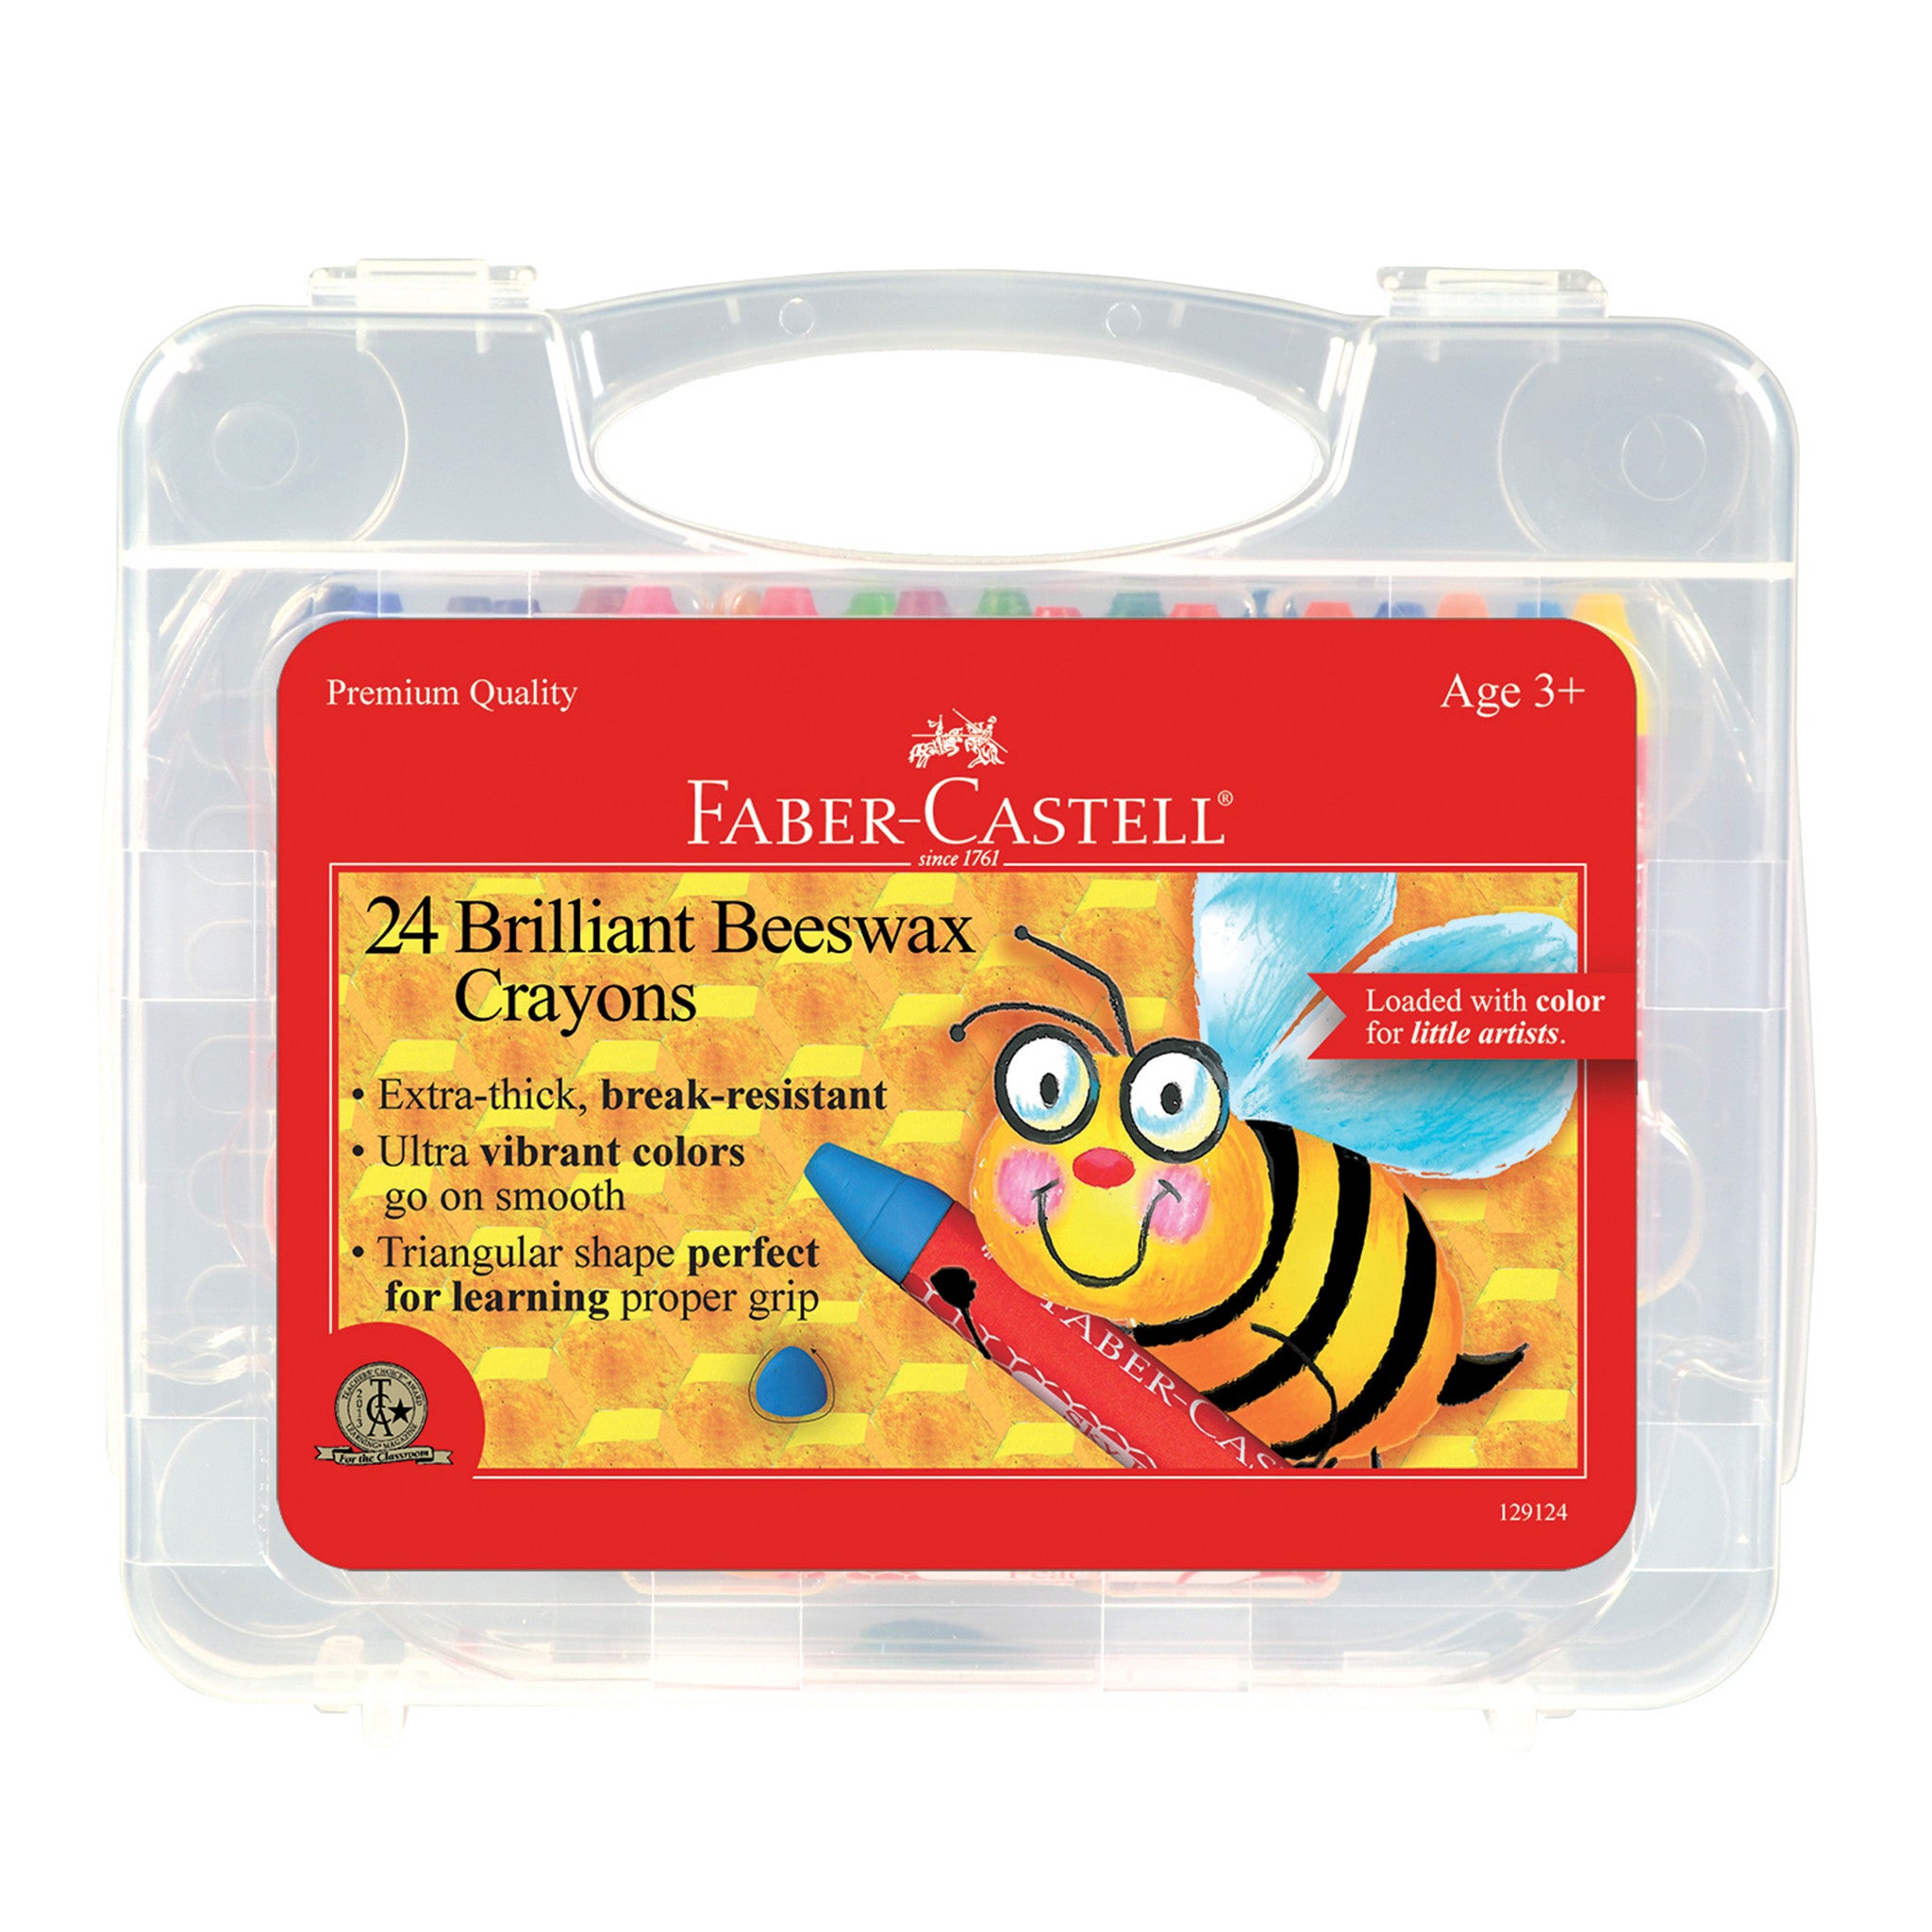 24 Brilliant Beeswax Crayons in Storage Case - #129124 – Faber-Castell USA